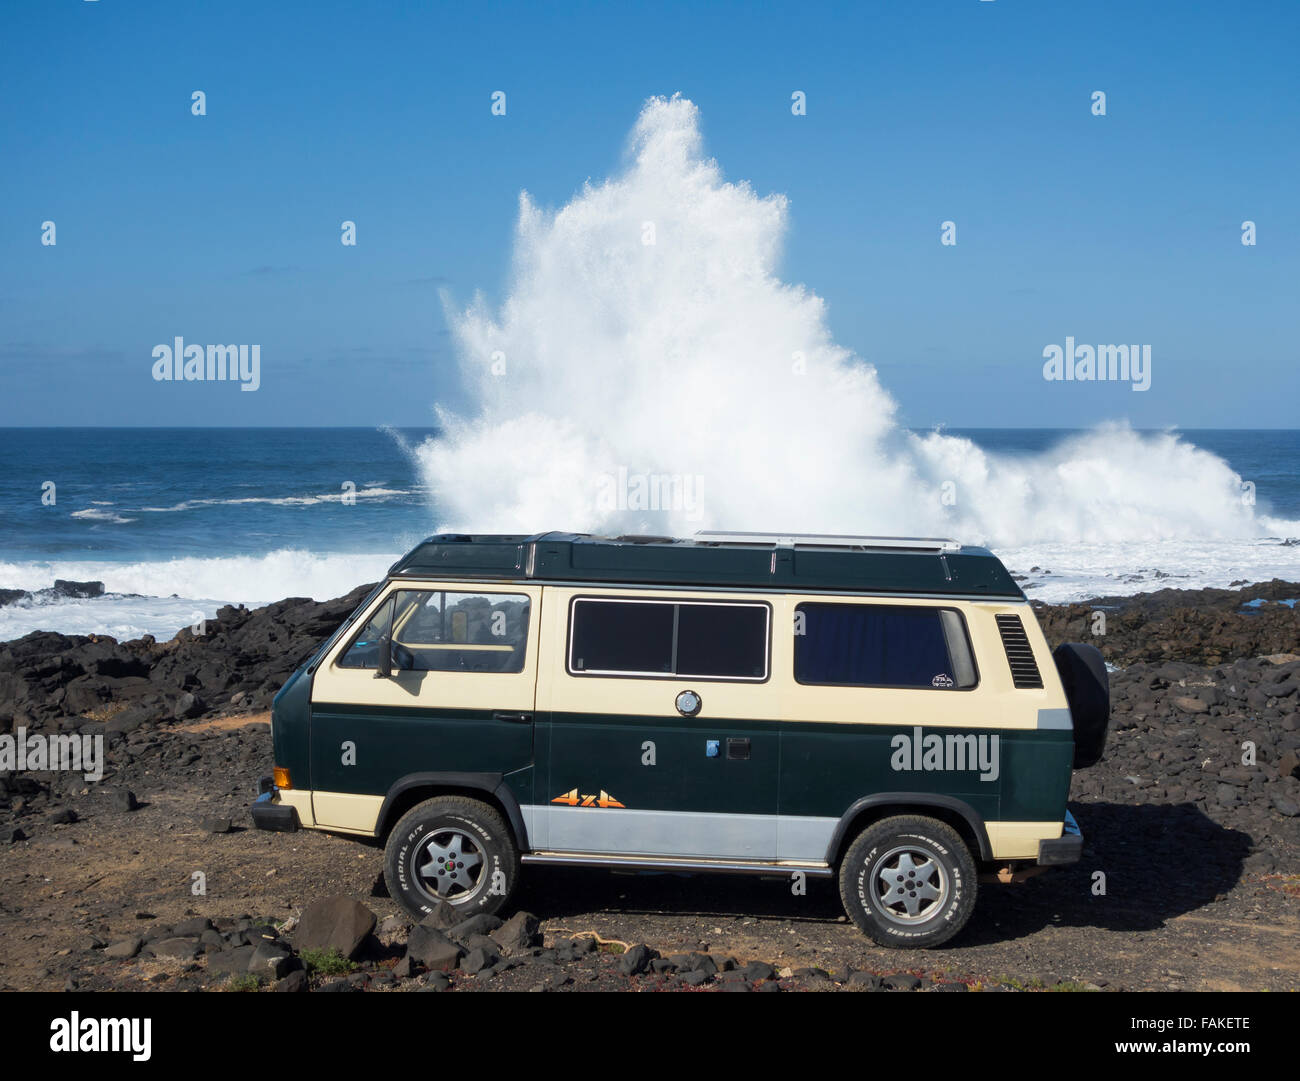 4x4 VW camper van with solar panel on roof parked on rocky surfing beach with huge waves breaking. Gran Canaria, Canary Islands. Stock Photo